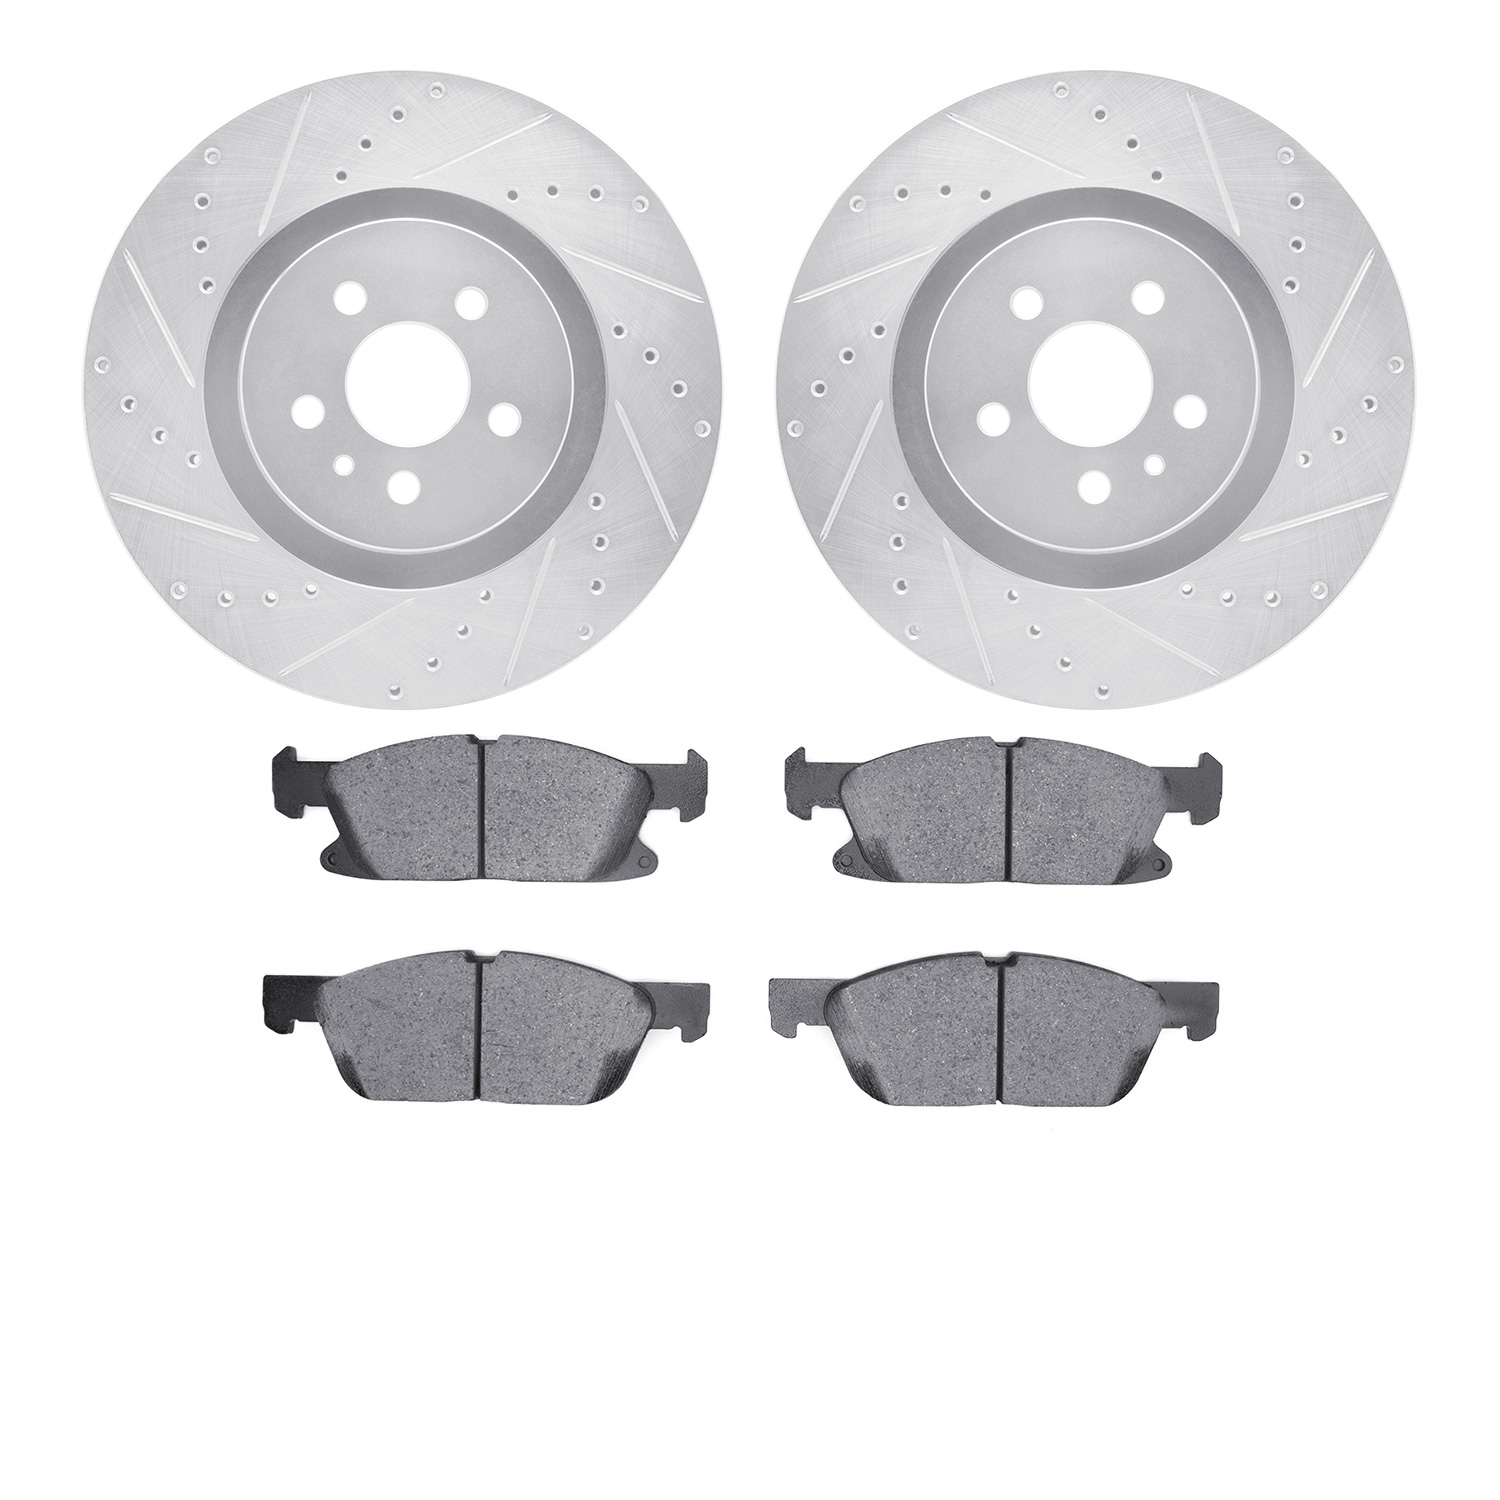 7502-55004 Drilled/Slotted Brake Rotors w/5000 Advanced Brake Pads Kit [Silver], Fits Select Ford/Lincoln/Mercury/Mazda, Positio